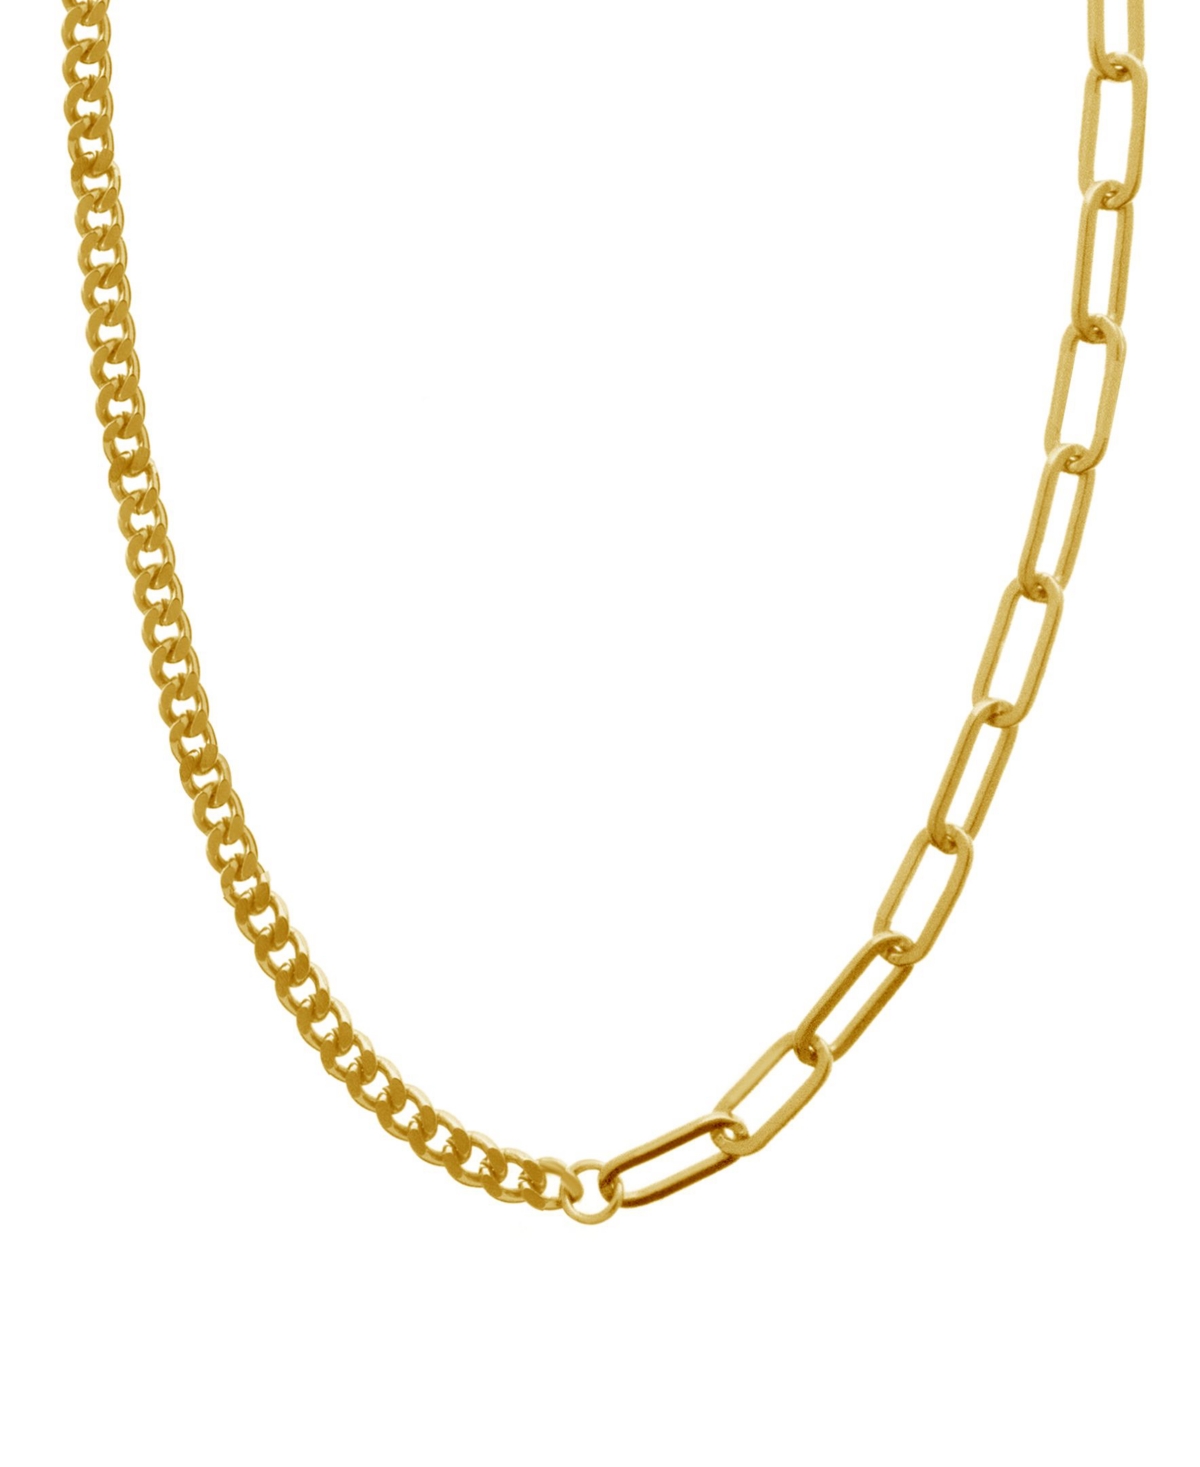 Gold Plated Cable Chain Necklace 16" + 2" Extender - Gold-Plated